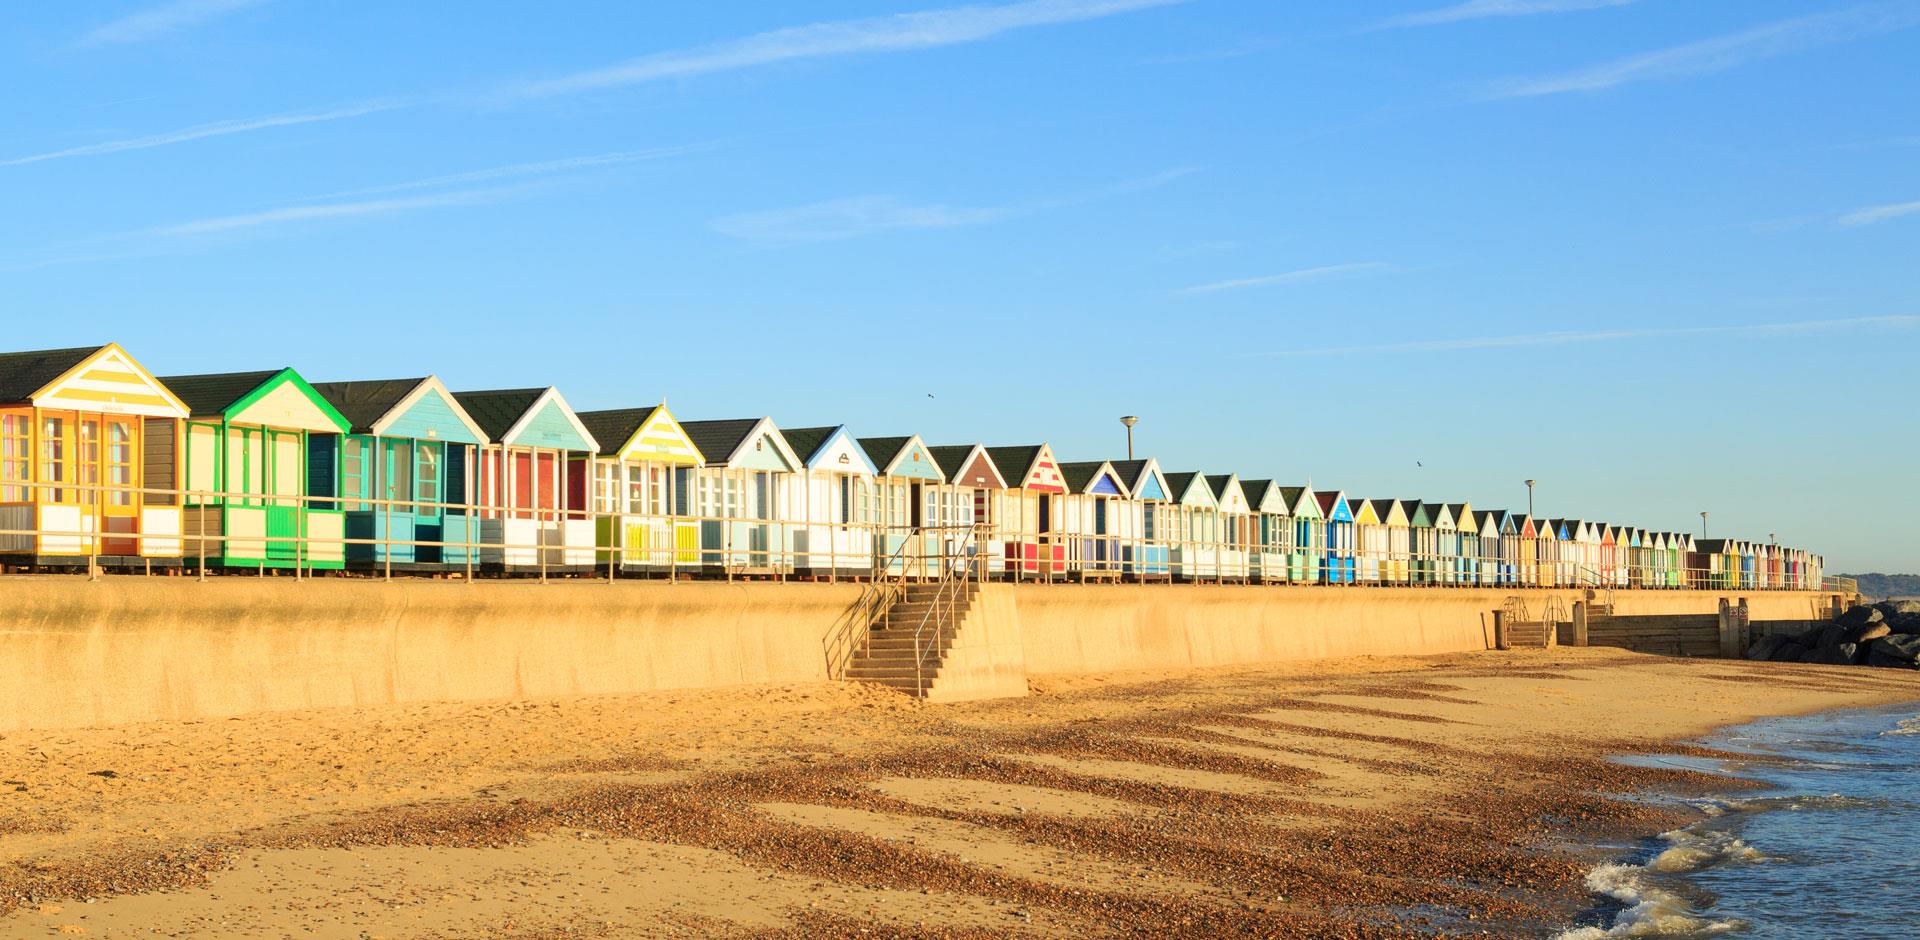 Colourful beach huts in Southwold, Suffolk